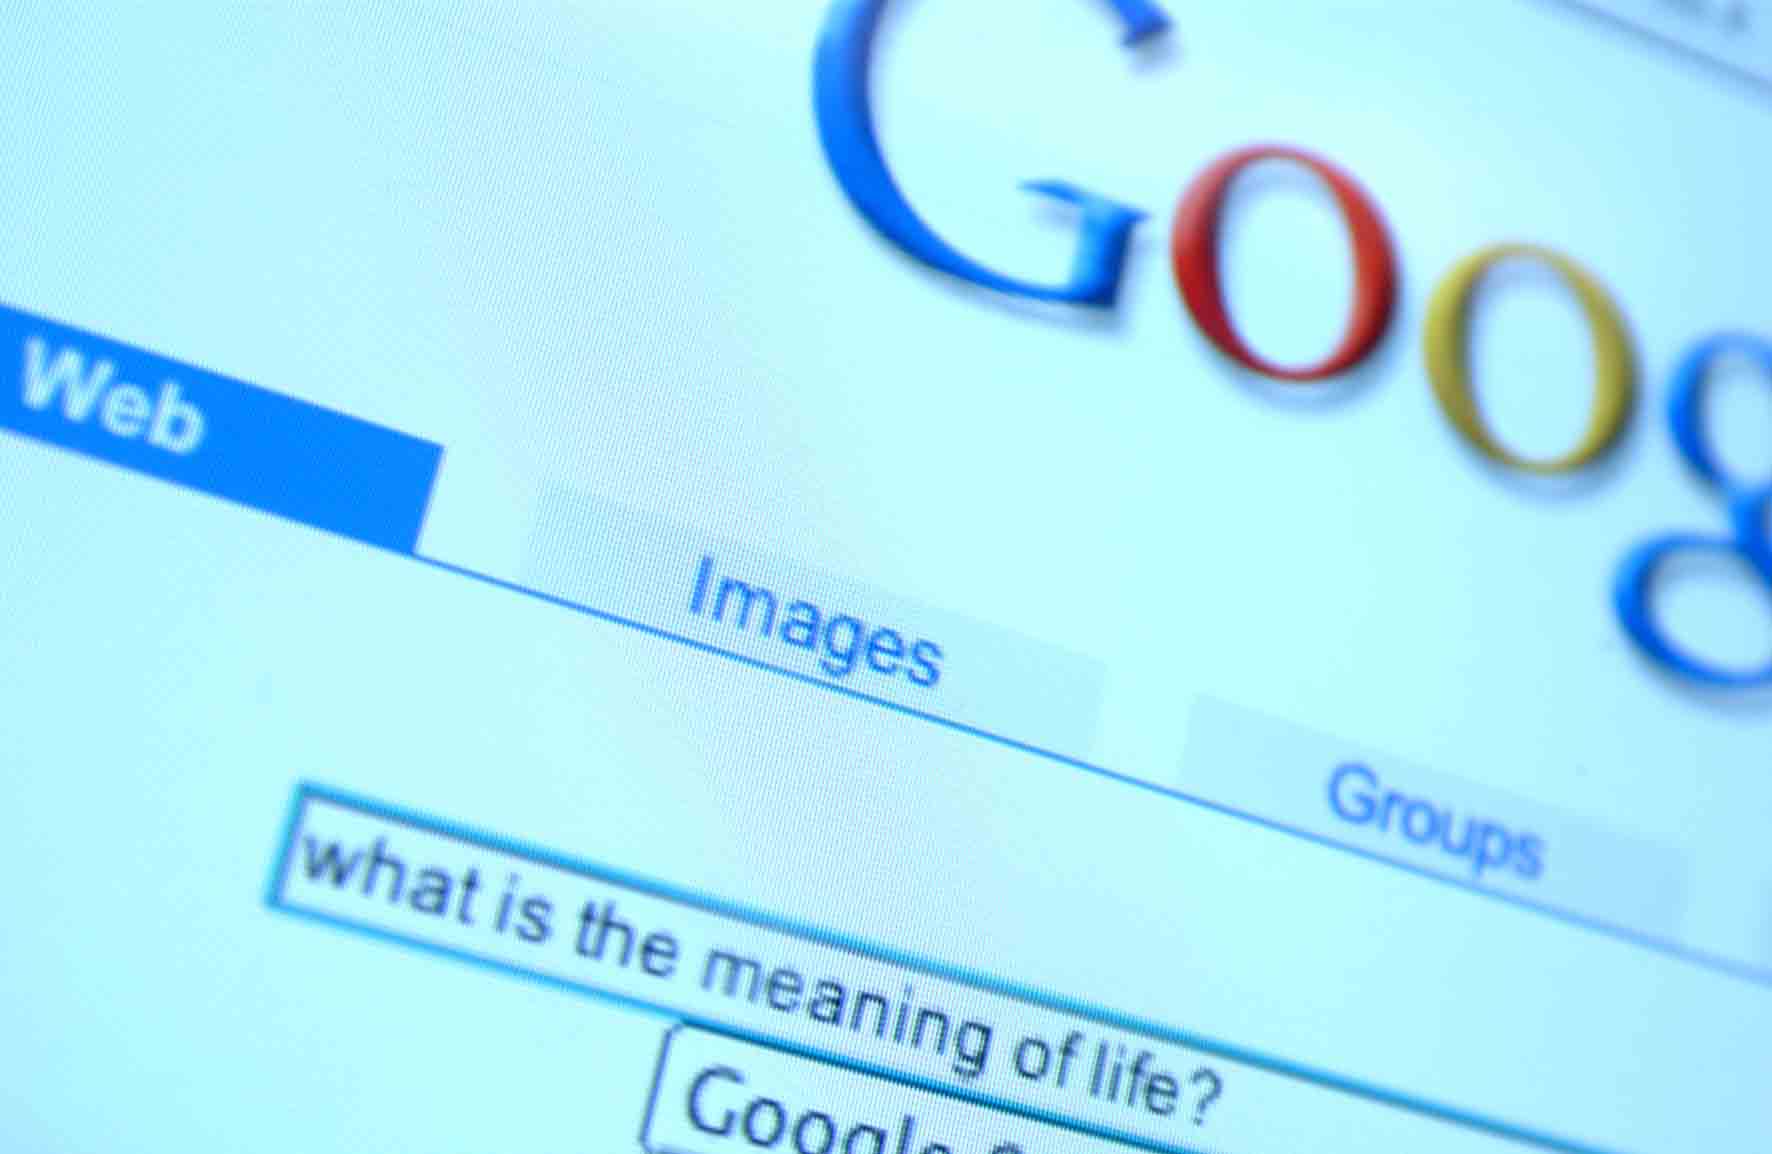 Personal Information to Become a Bigger Part of Google Search